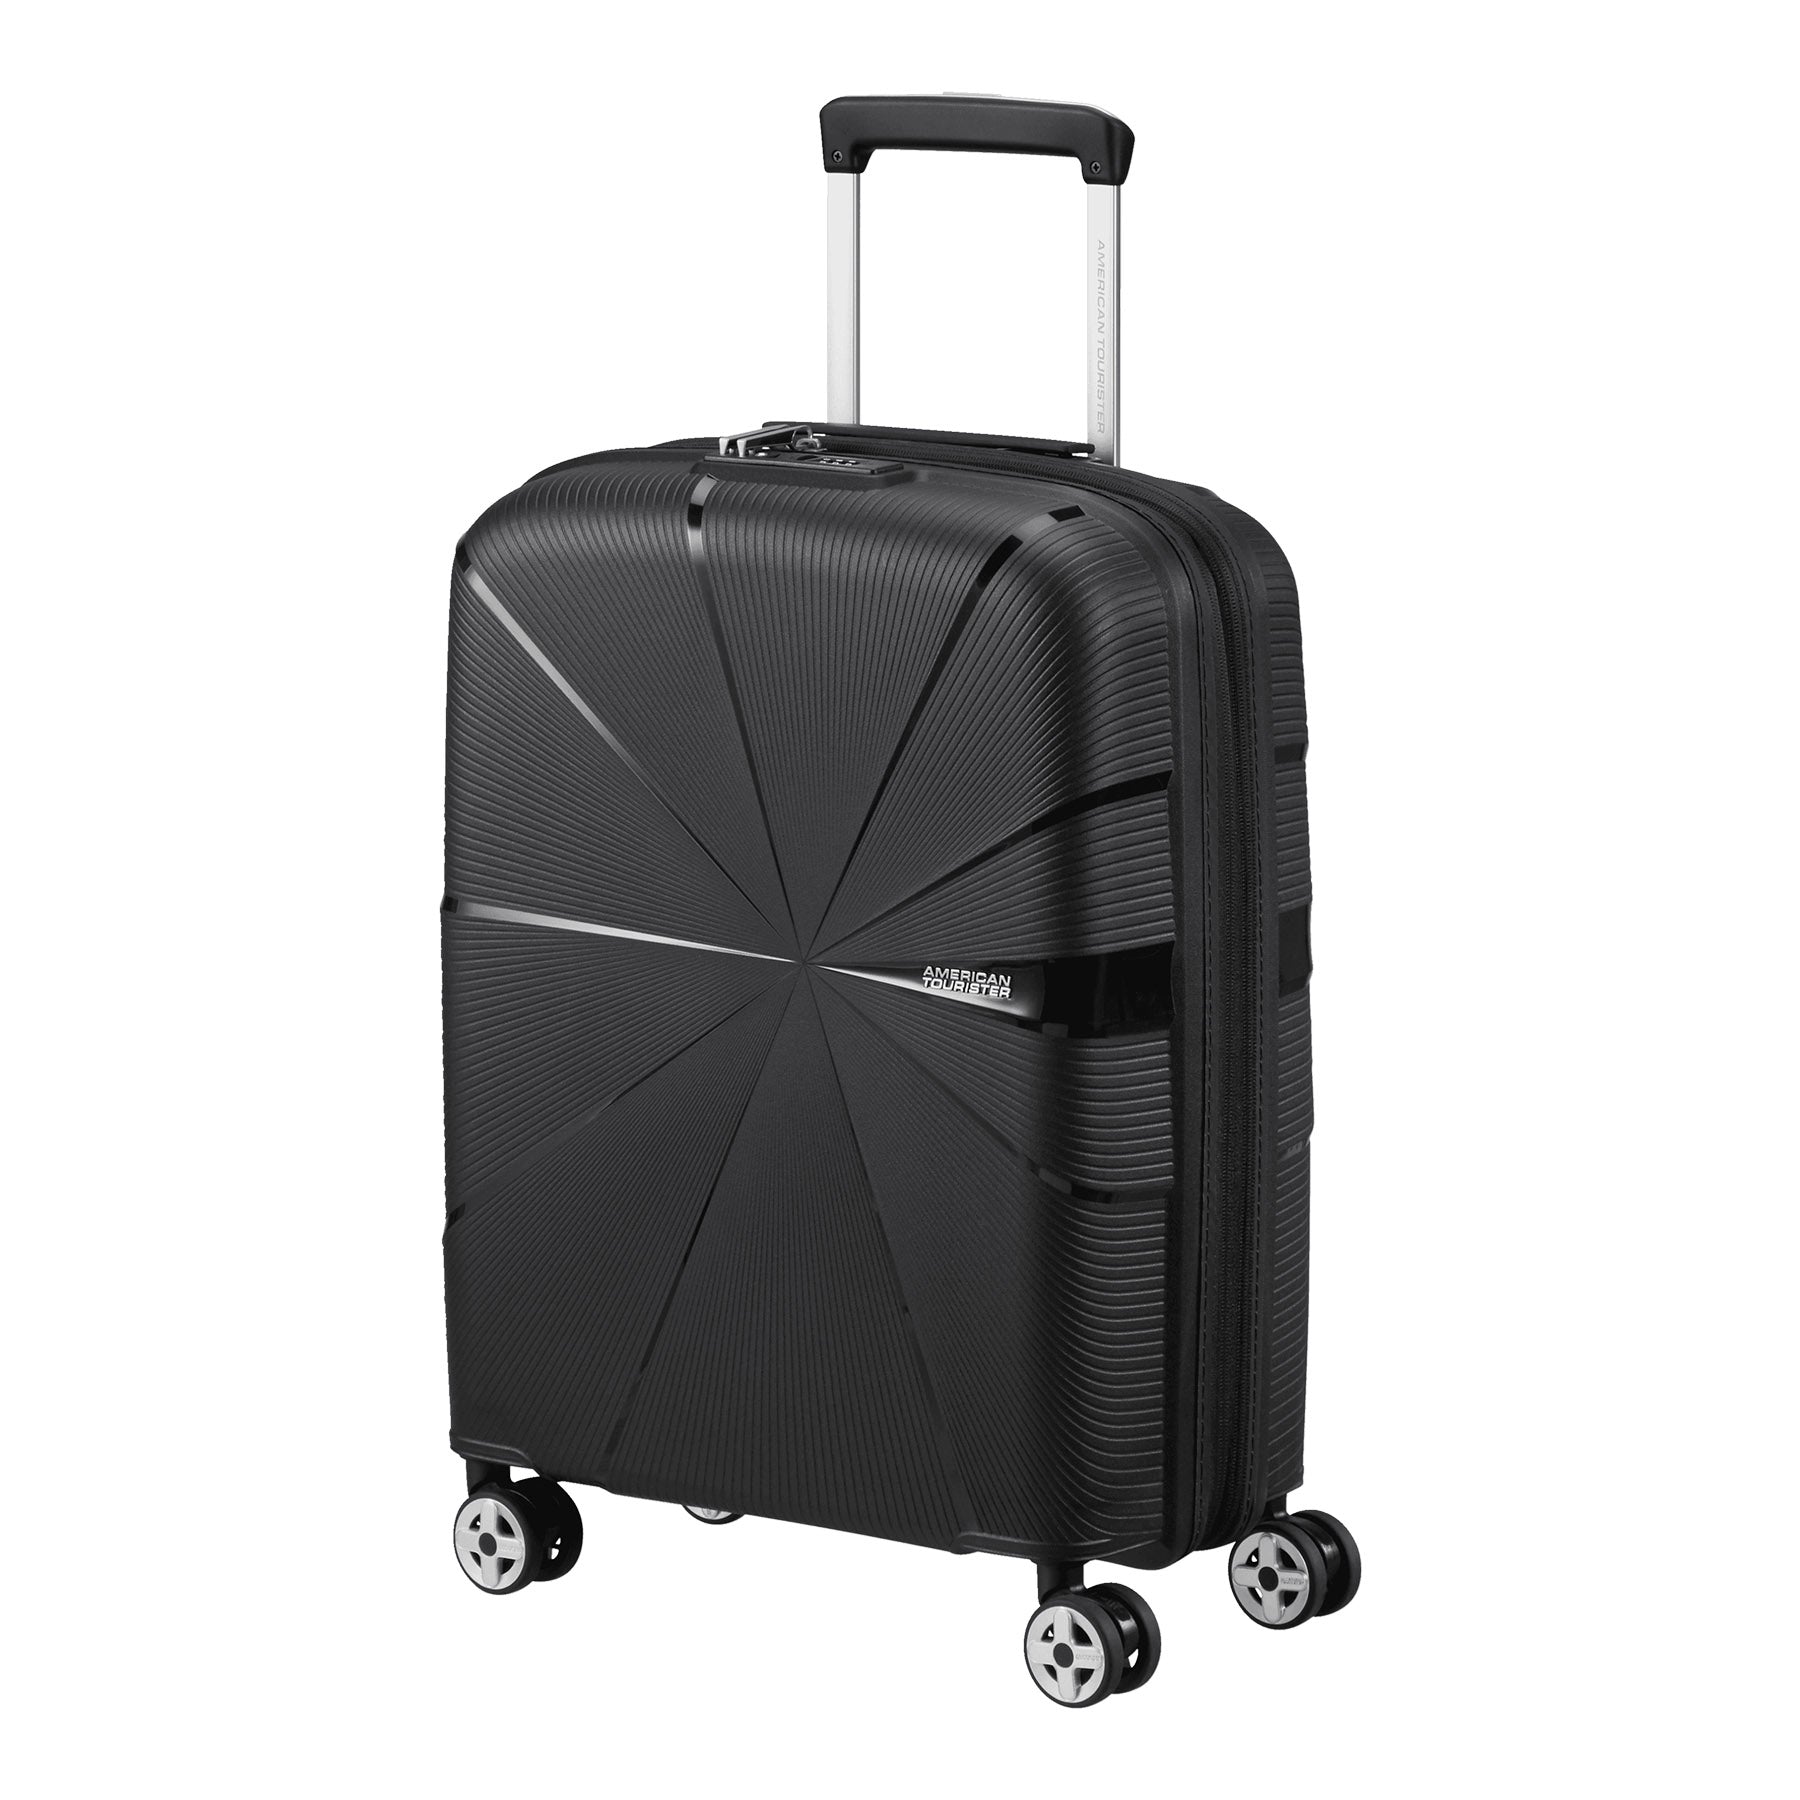 American Tourister Starvibe Spinner Carry-On Expandable Luggage - Black